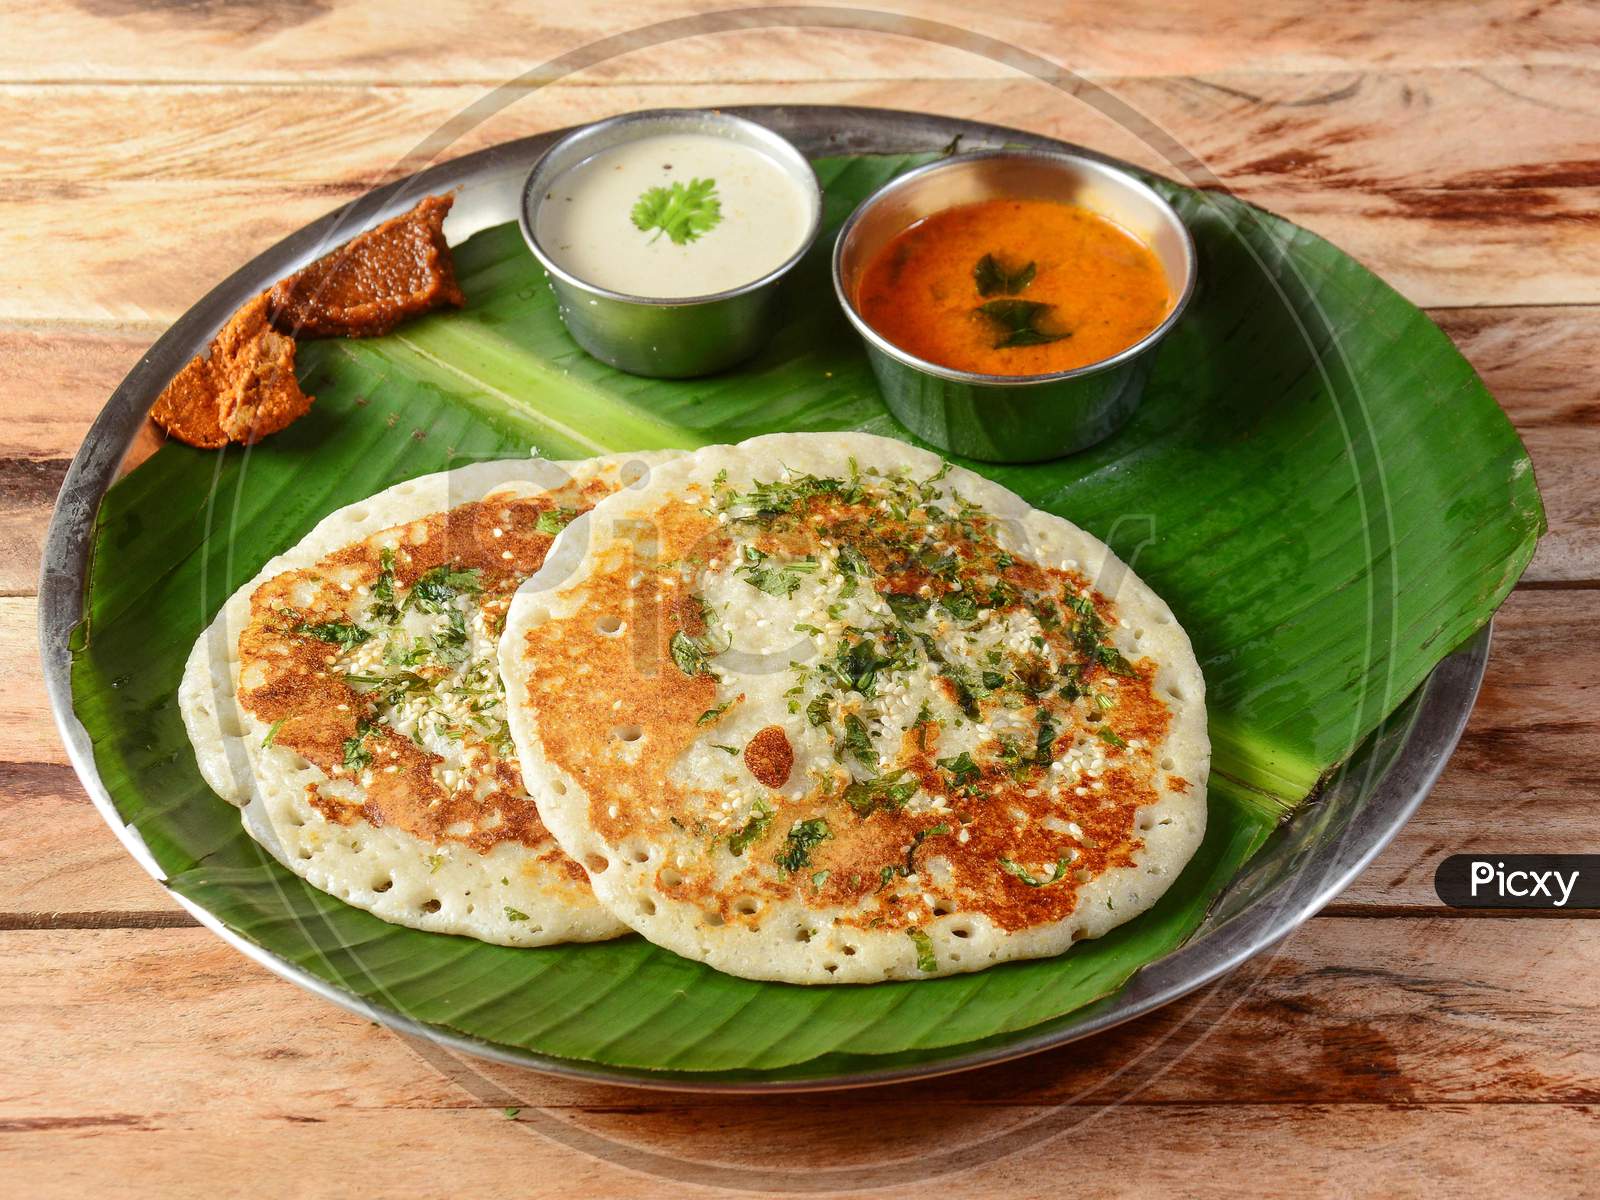 Set Dosa, A South Indian Traditional And Popular Breakfast Served With Chutney And Sambar Over A Rustic Wooden Background, Selective Focus